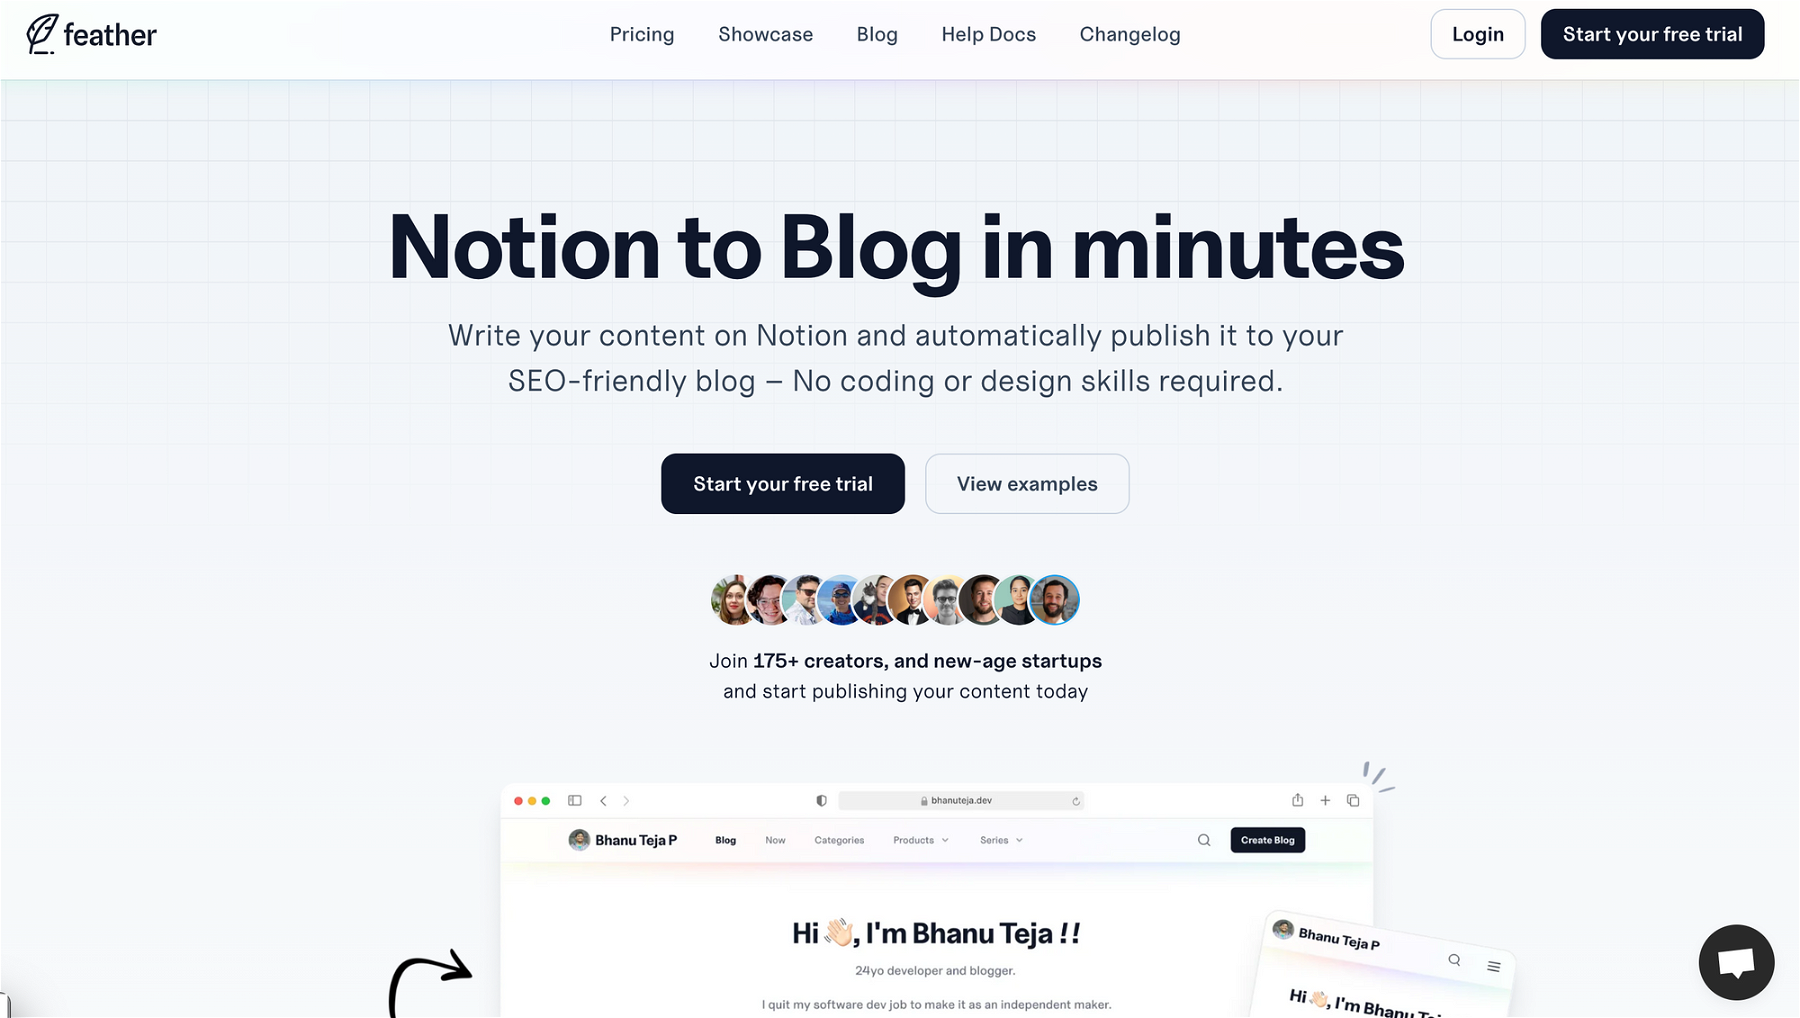 How to add a blog to your website: Step-by-step guide